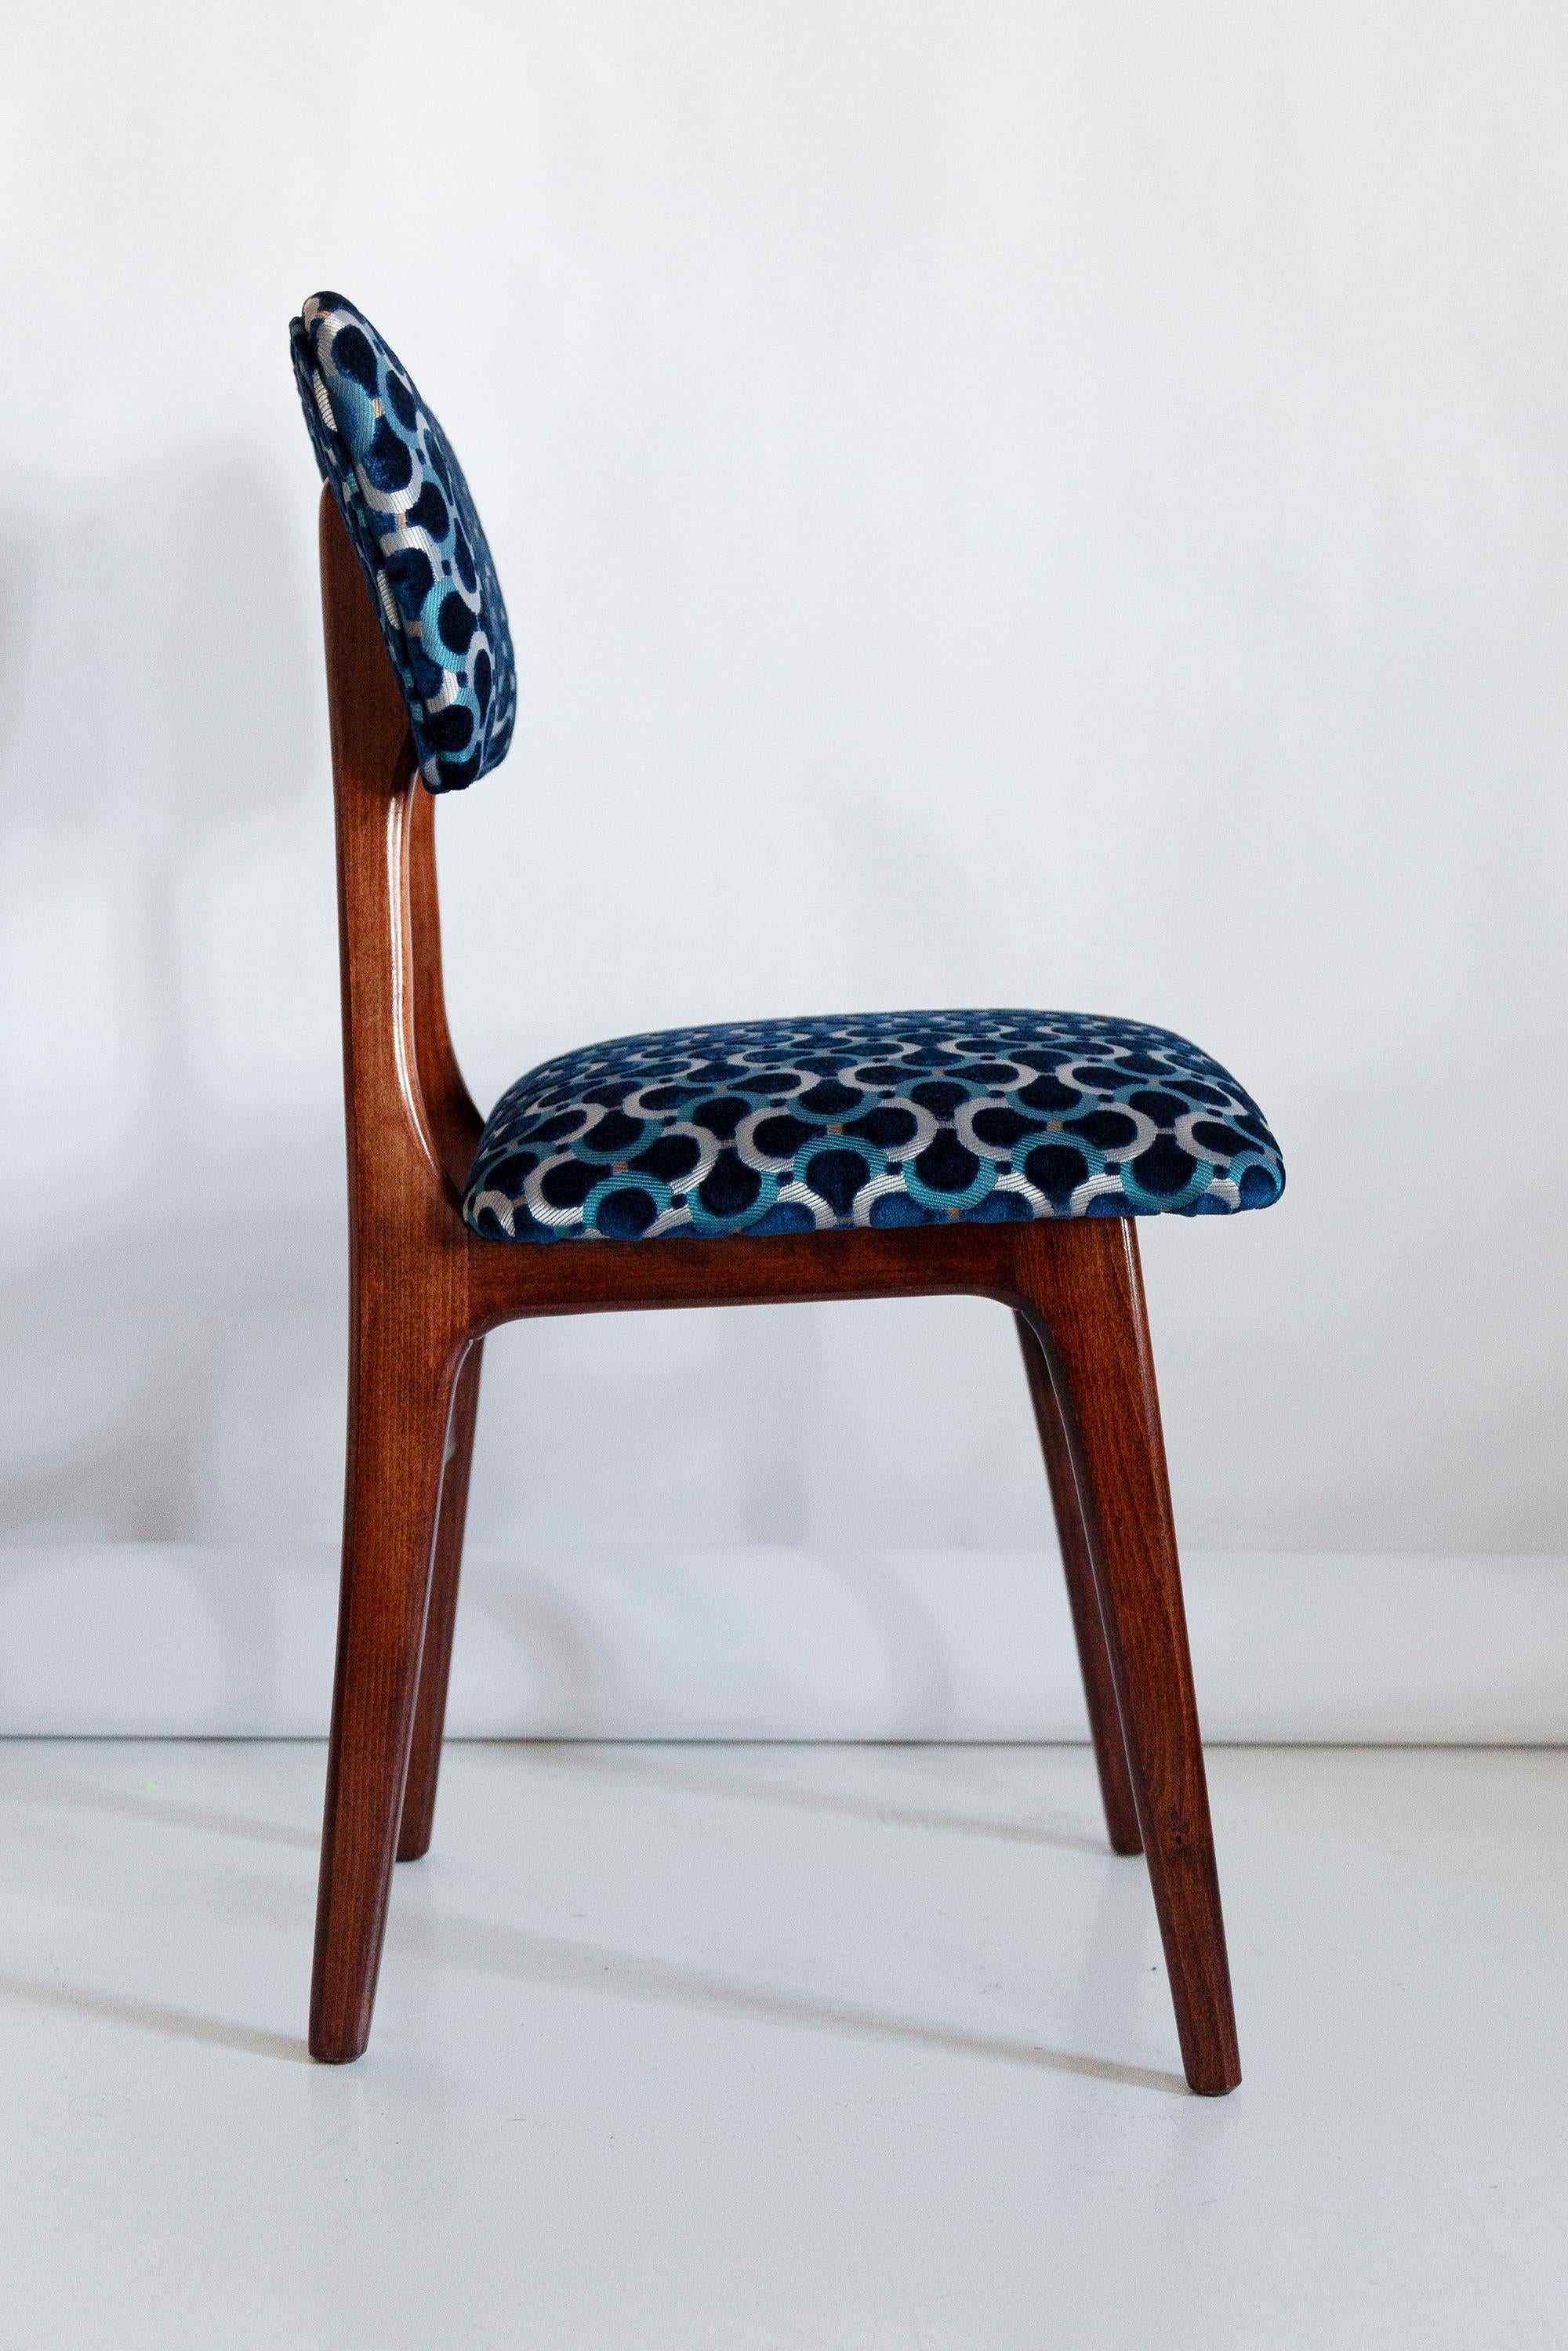 20th Century Mid Century Butterfly Chair, Blue Scarabeo Velvet, Dark Wood, Europe, 1960s For Sale